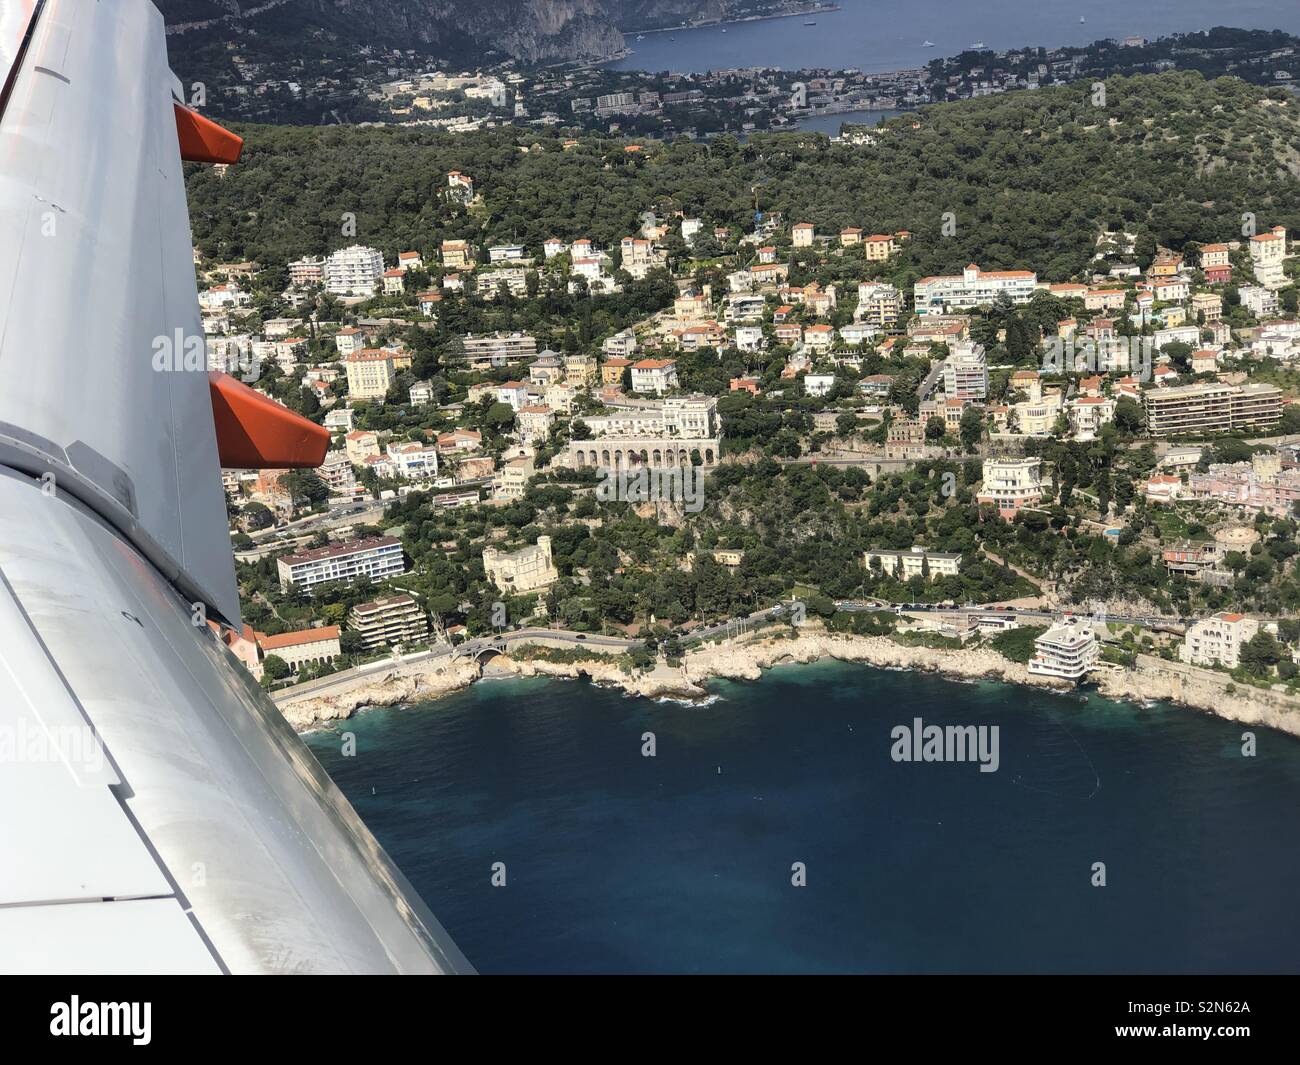 Aerial view of Mount Boron, Nice from an EasyJet flight into Nice Airport. Stock Photo